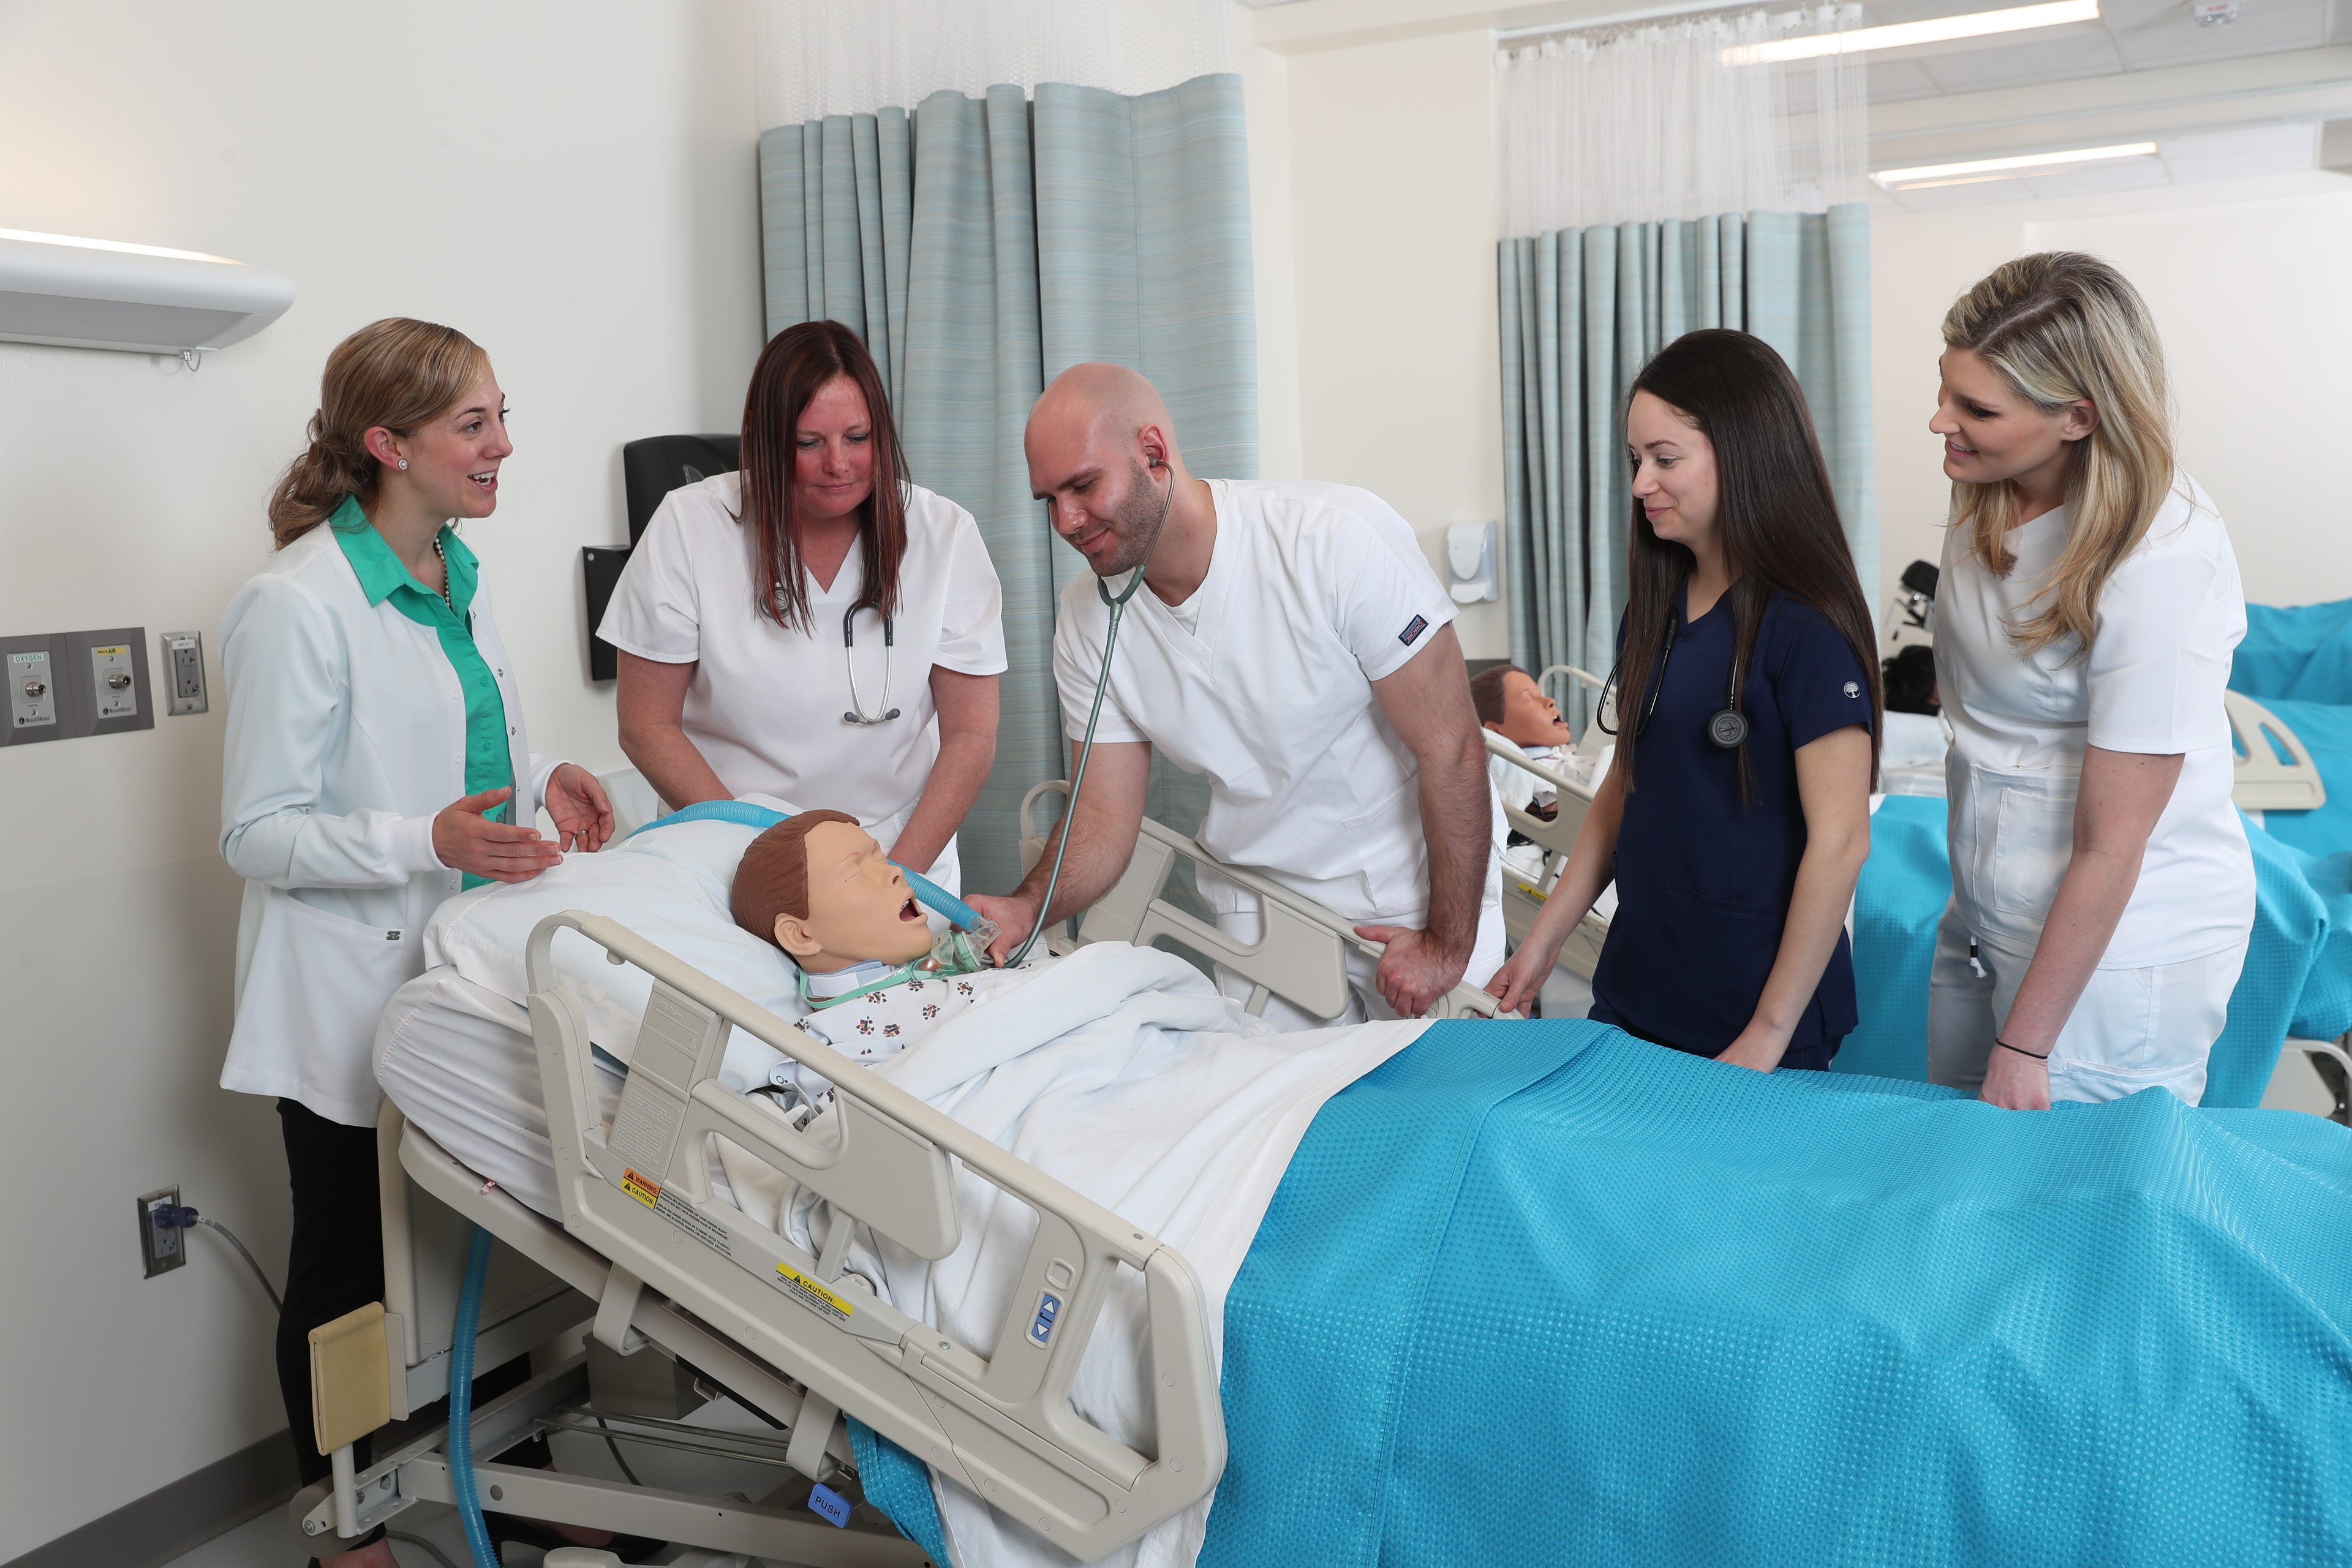 Four BGSU BSN students take the heartbeat of a simulation mannequin with a professor looking on in an Ohio classroom.